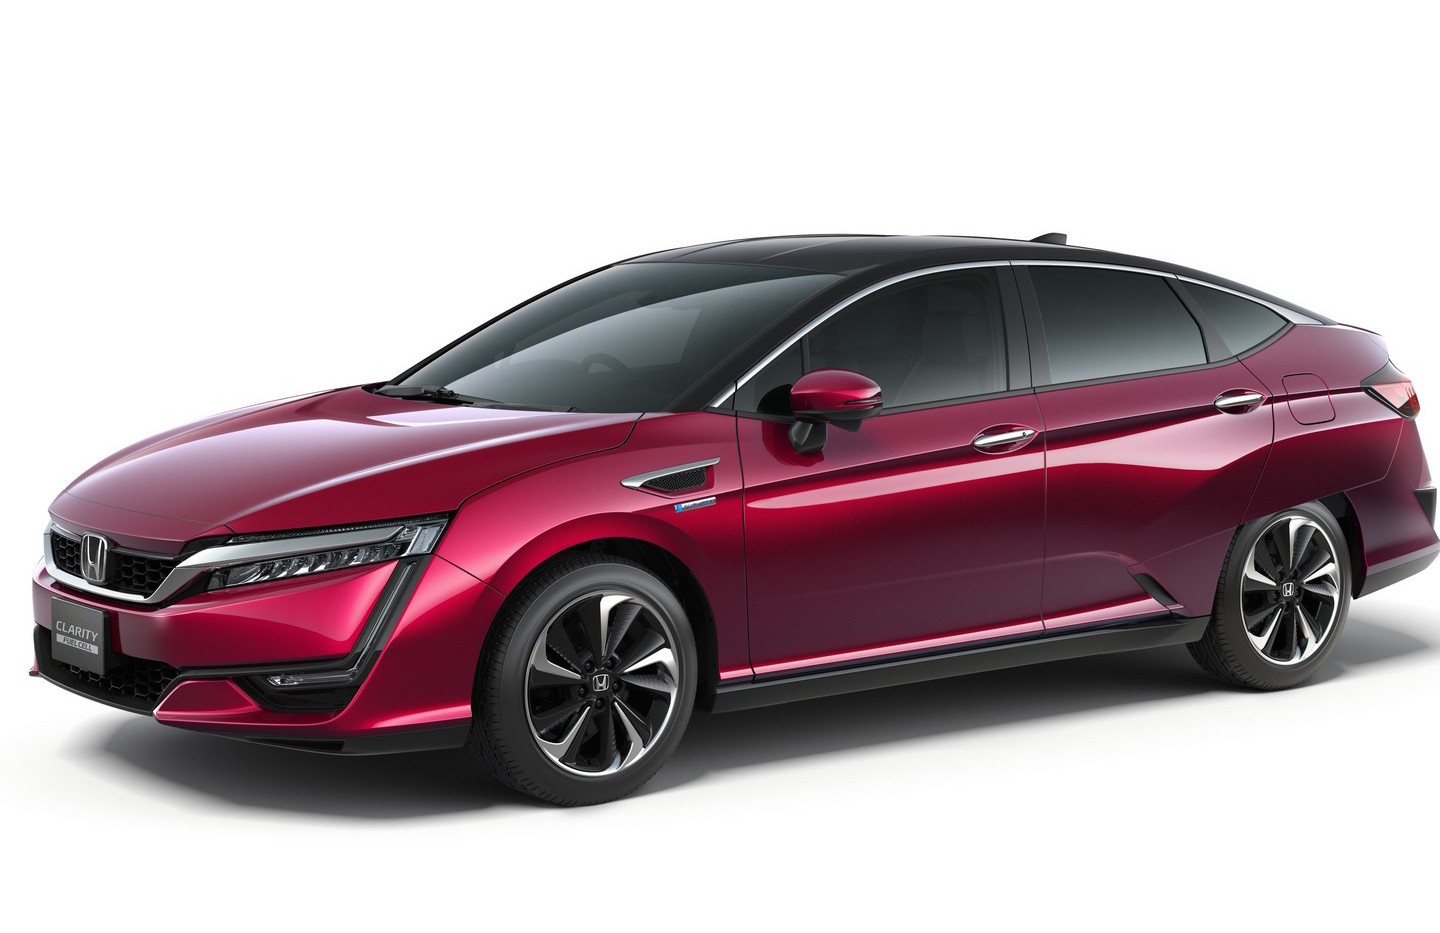 2016 Honda Clarity Fuel Cell production car revealed